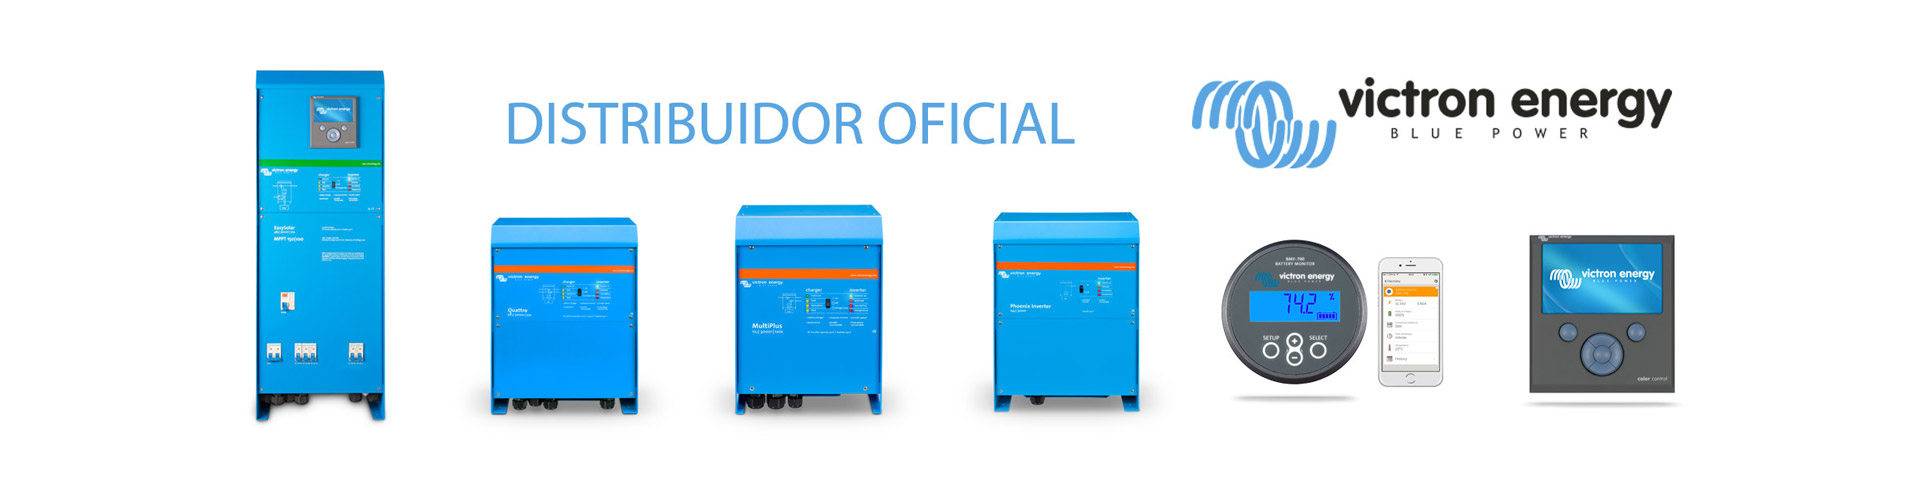 uidor oficial Victron Energy